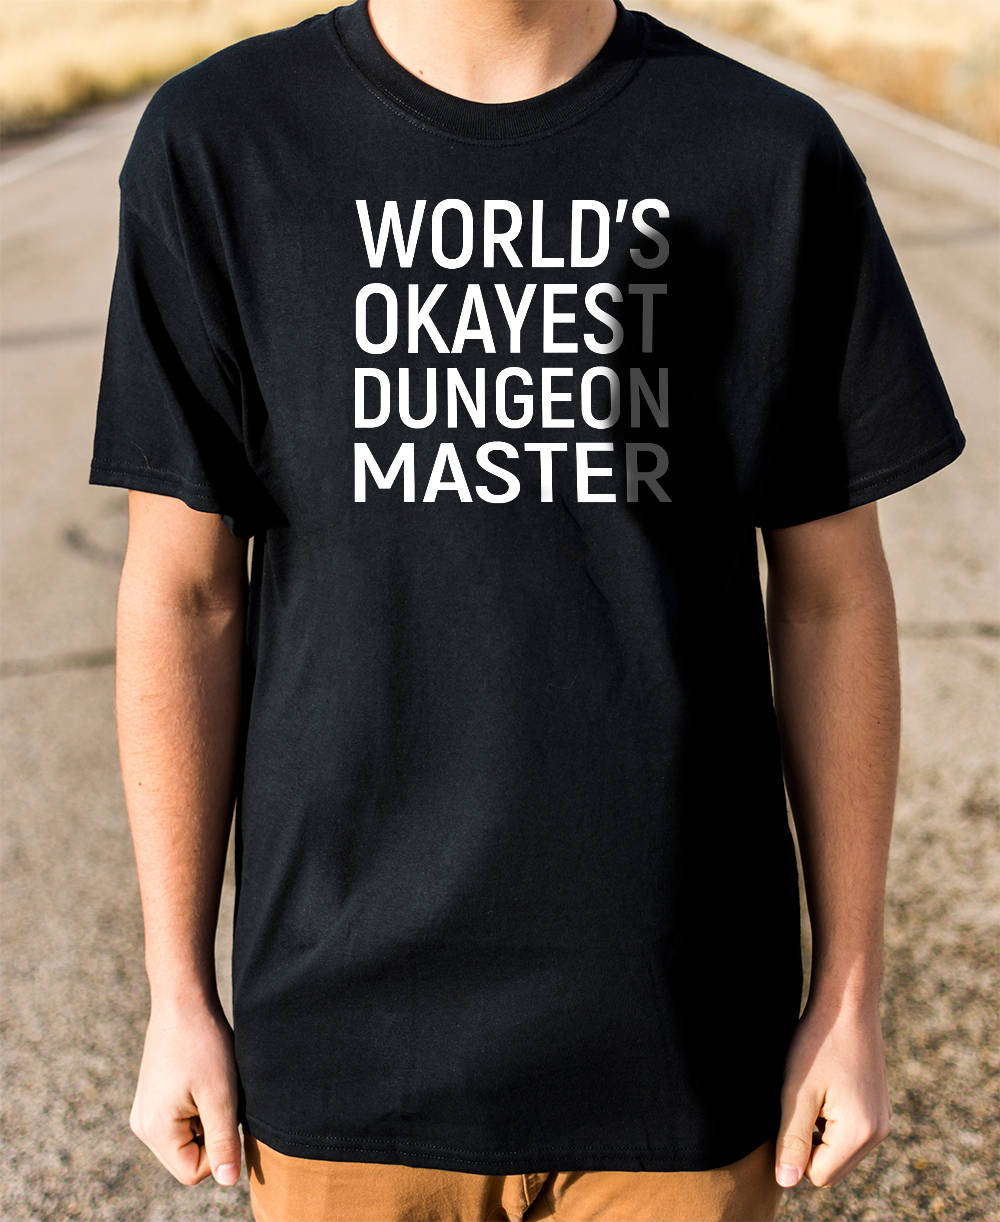 World's Okayest Dungeon Master T-Shirt  Level 1 Gamers   